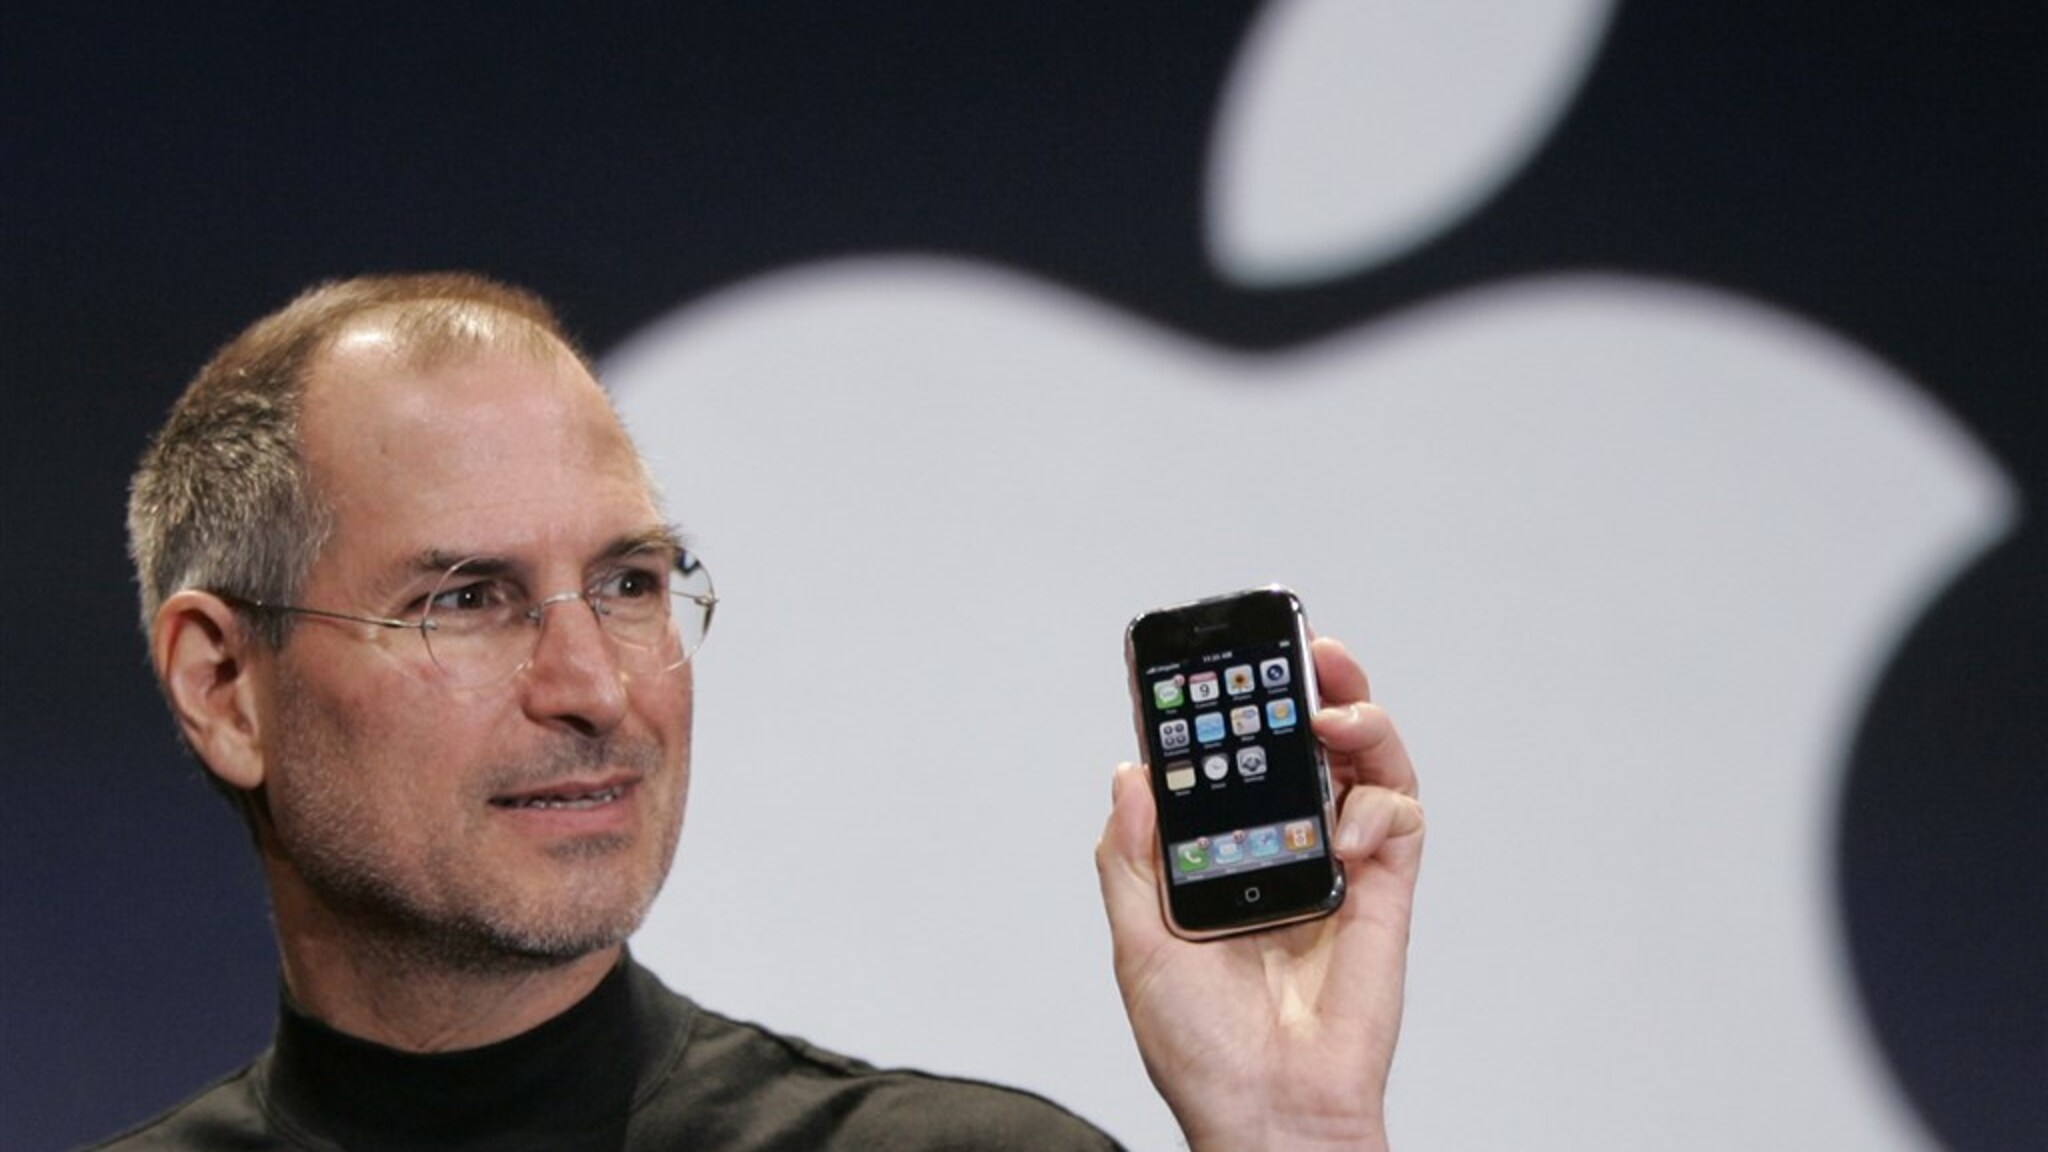 The first iPhone model sold at auction for more than 300 times the original price